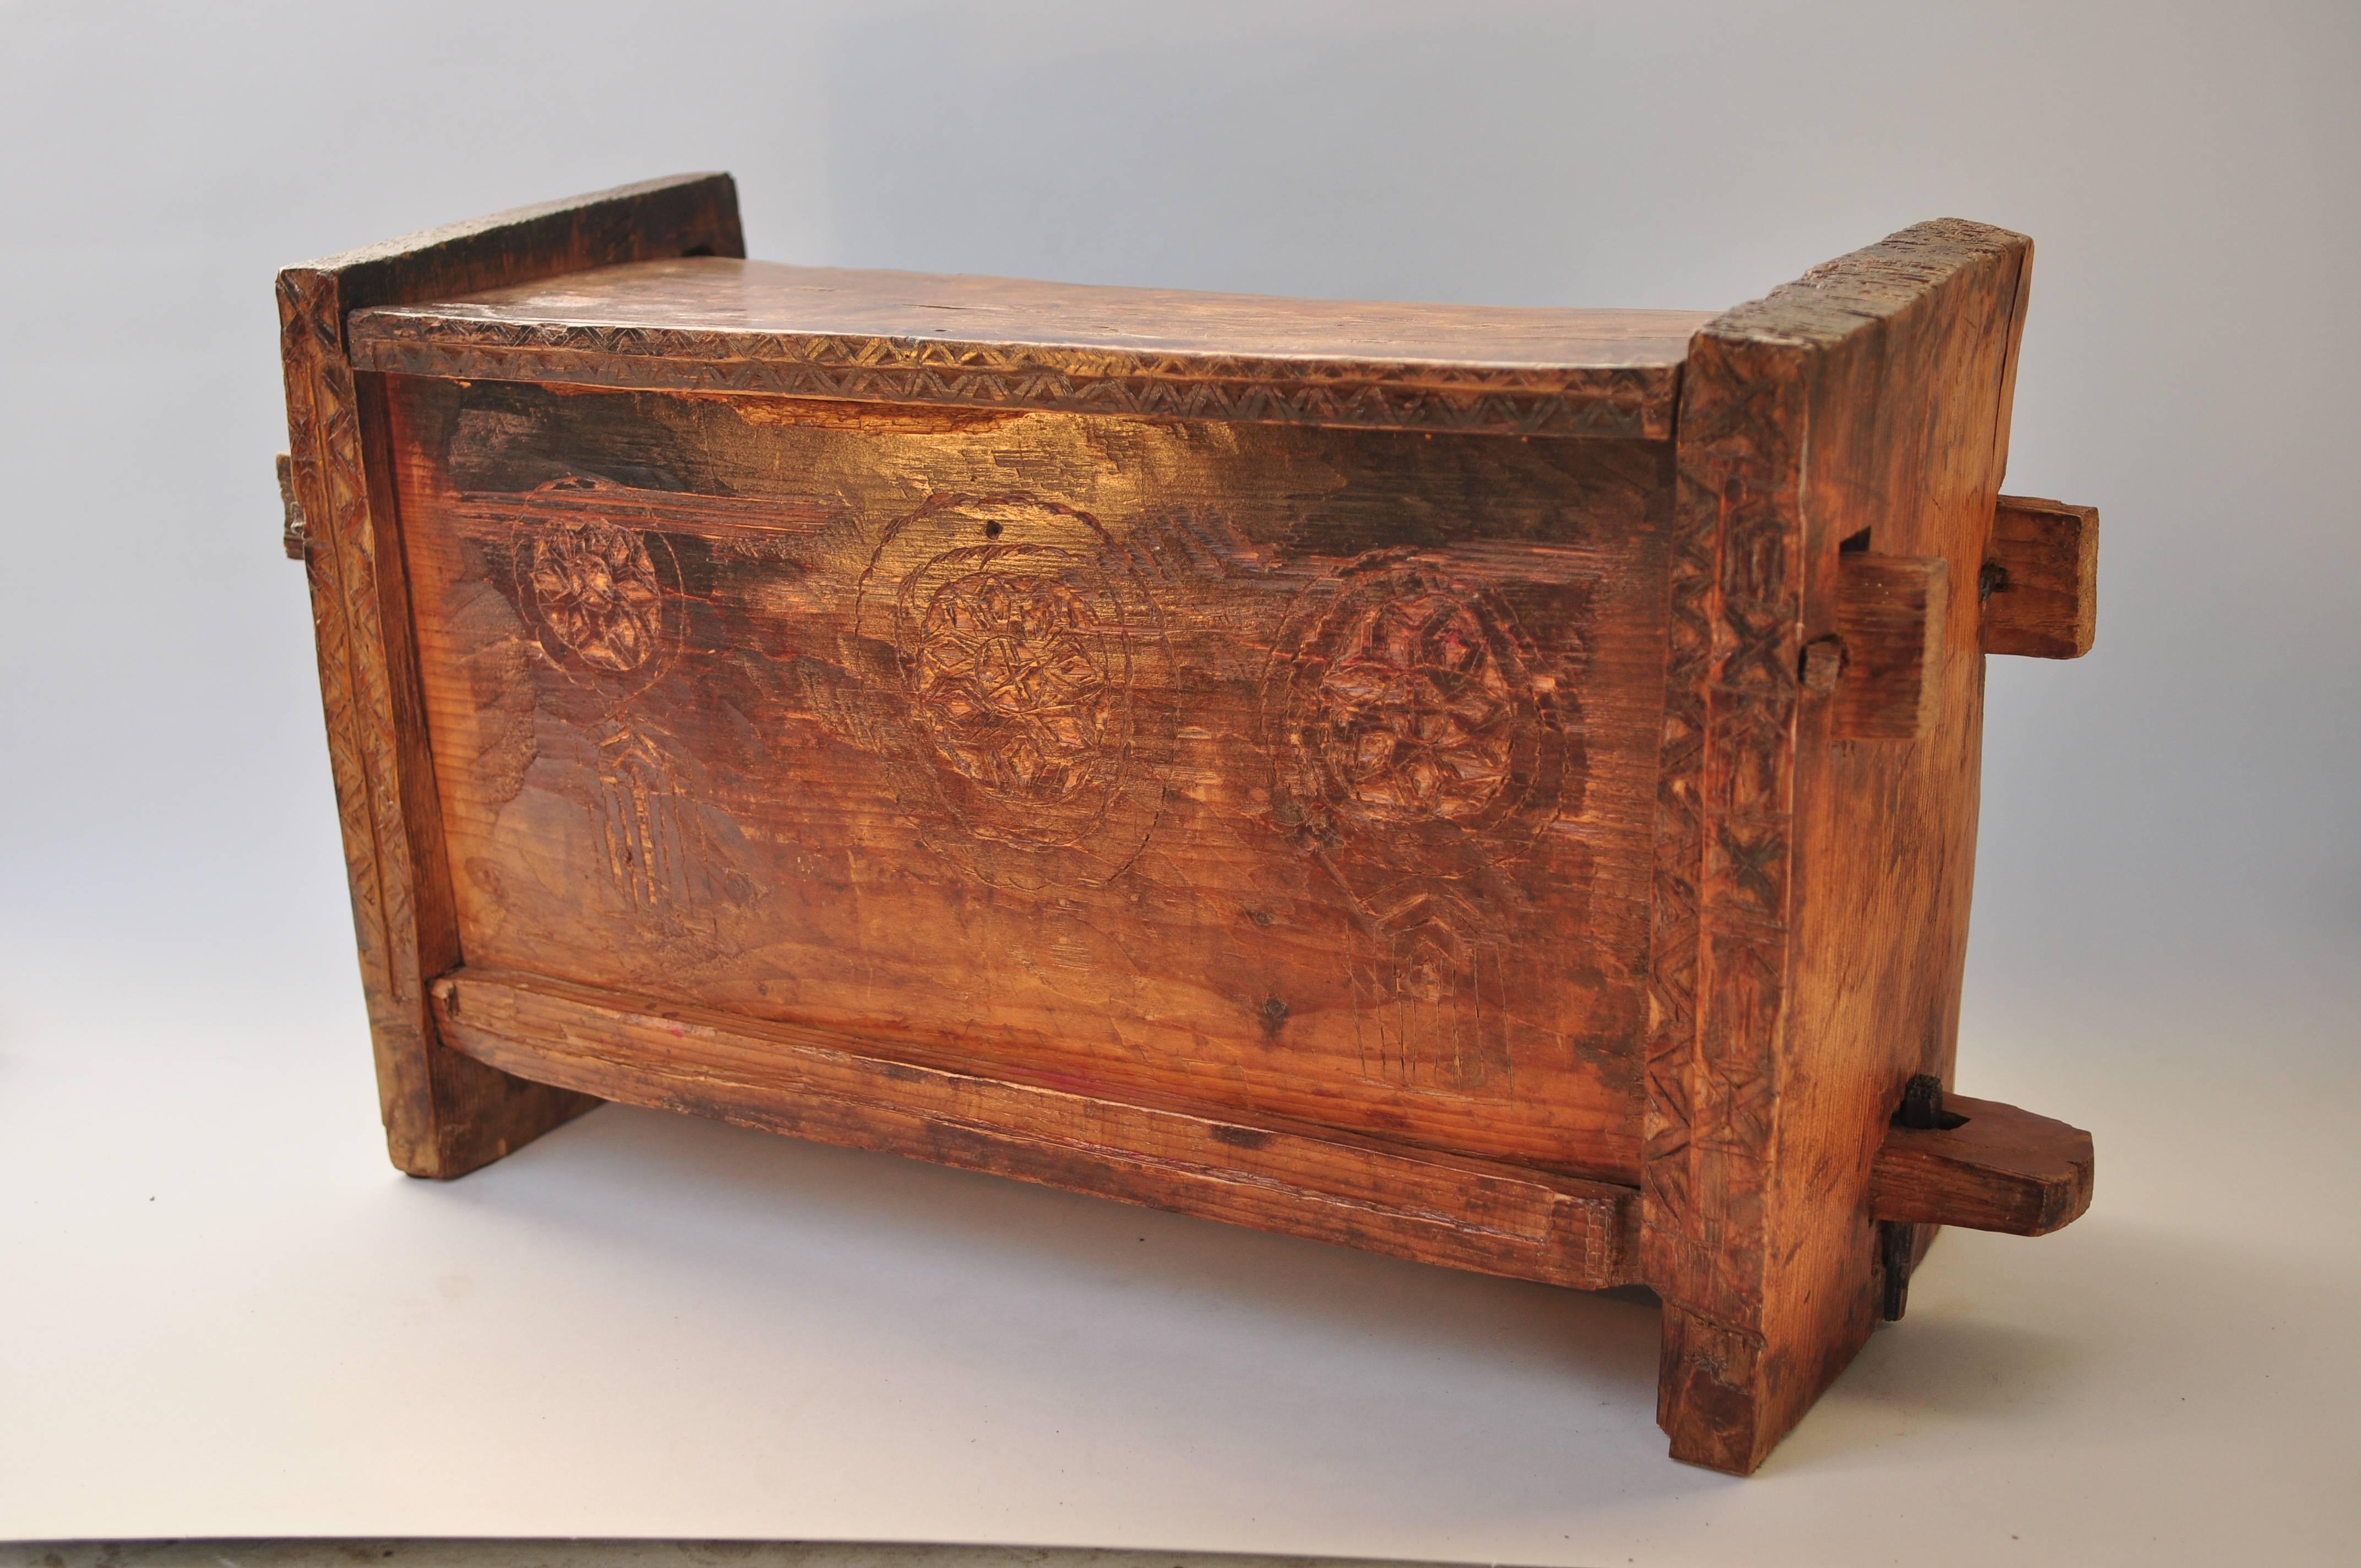 Primitive hand-carved wooden chest. Raute people of Nepal. Mid-Late 20th century.
Offered by Bruce Hughes.
This charming and very rustic wooden chest was made using basic tools and incorporates simple carved decorative motifs on the front. The box